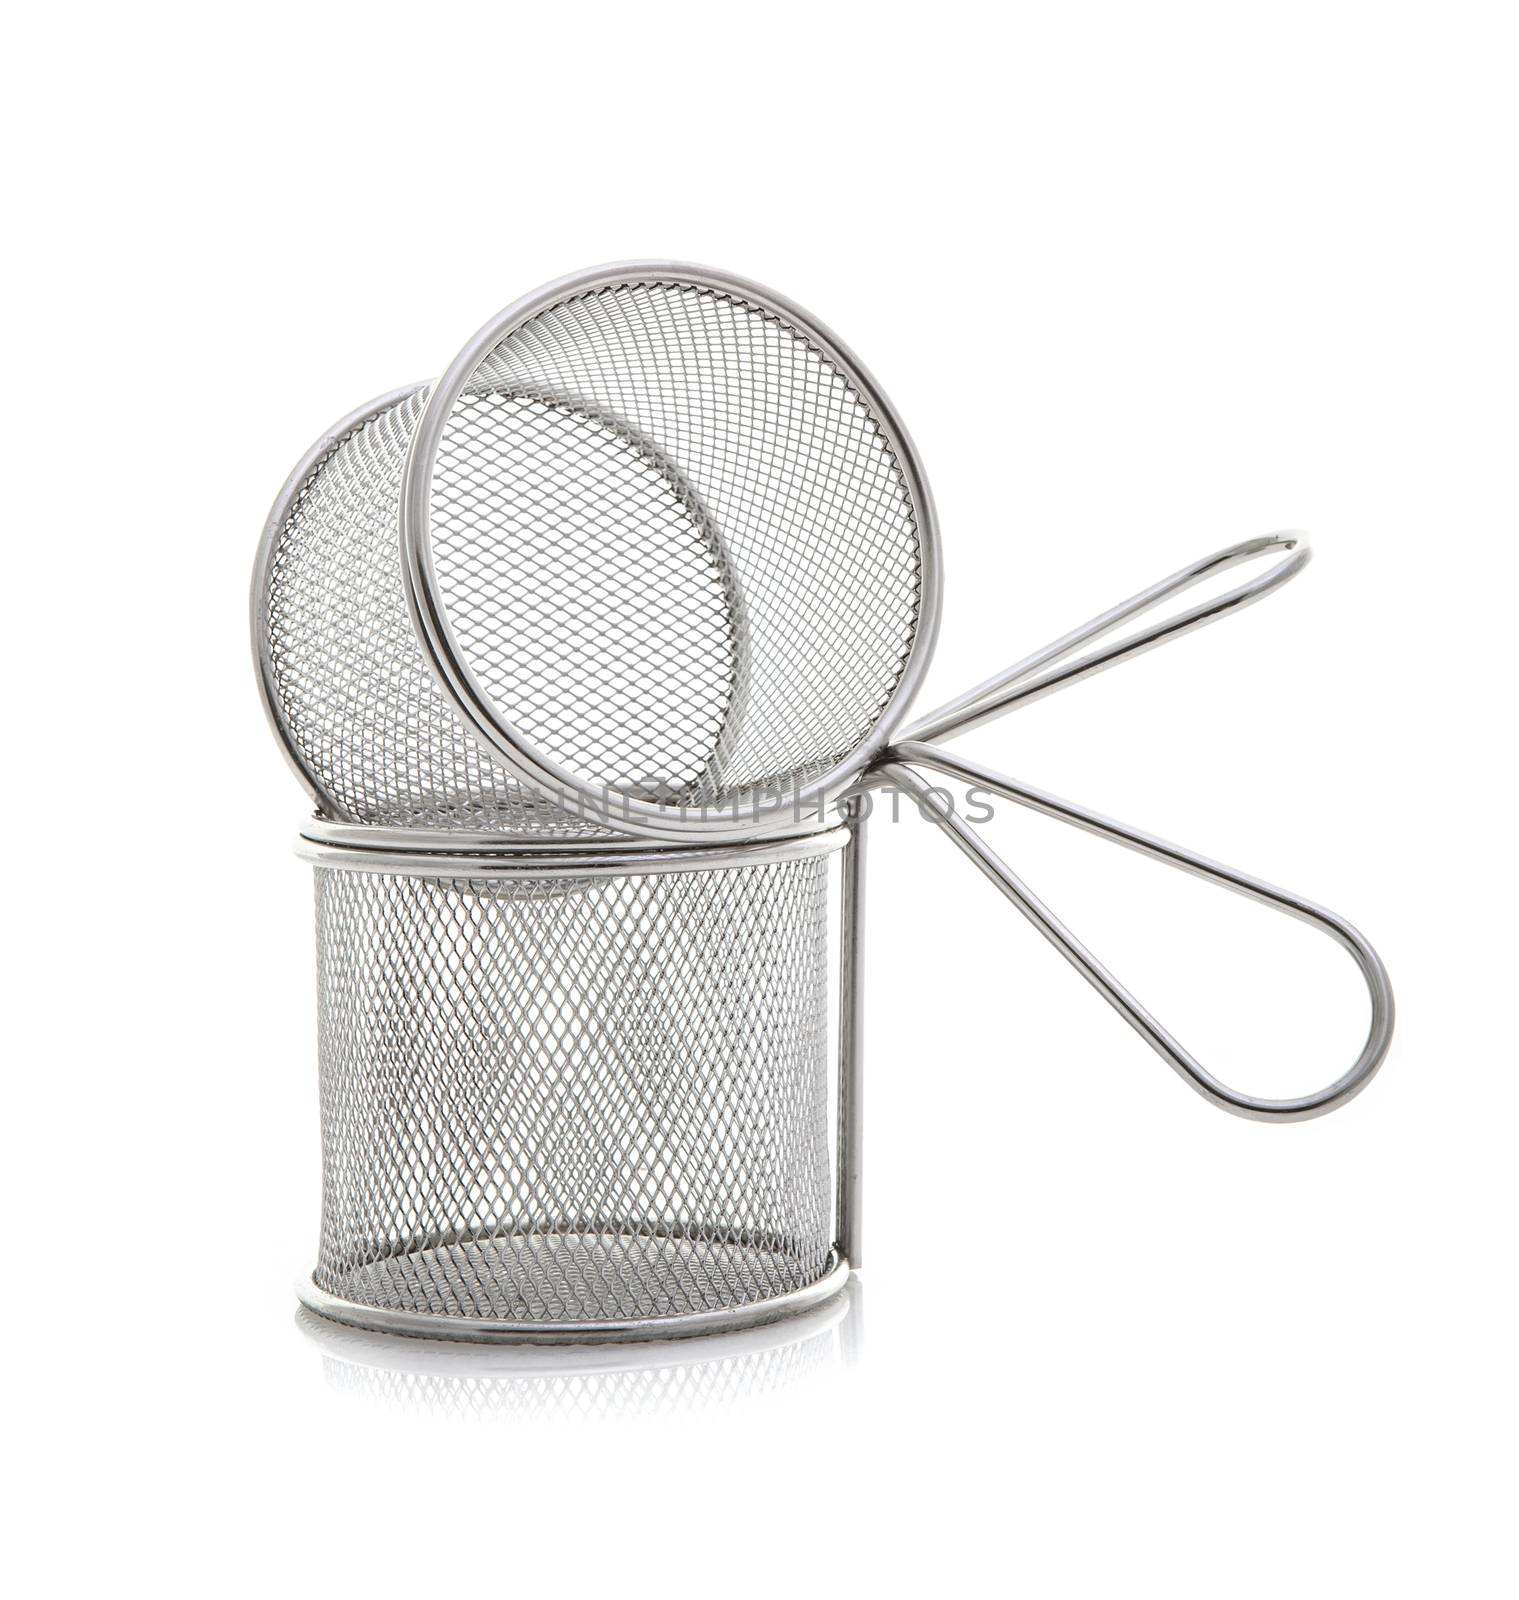 Two Empty Wire Chip Baskets on a White Background by urbanbuzz